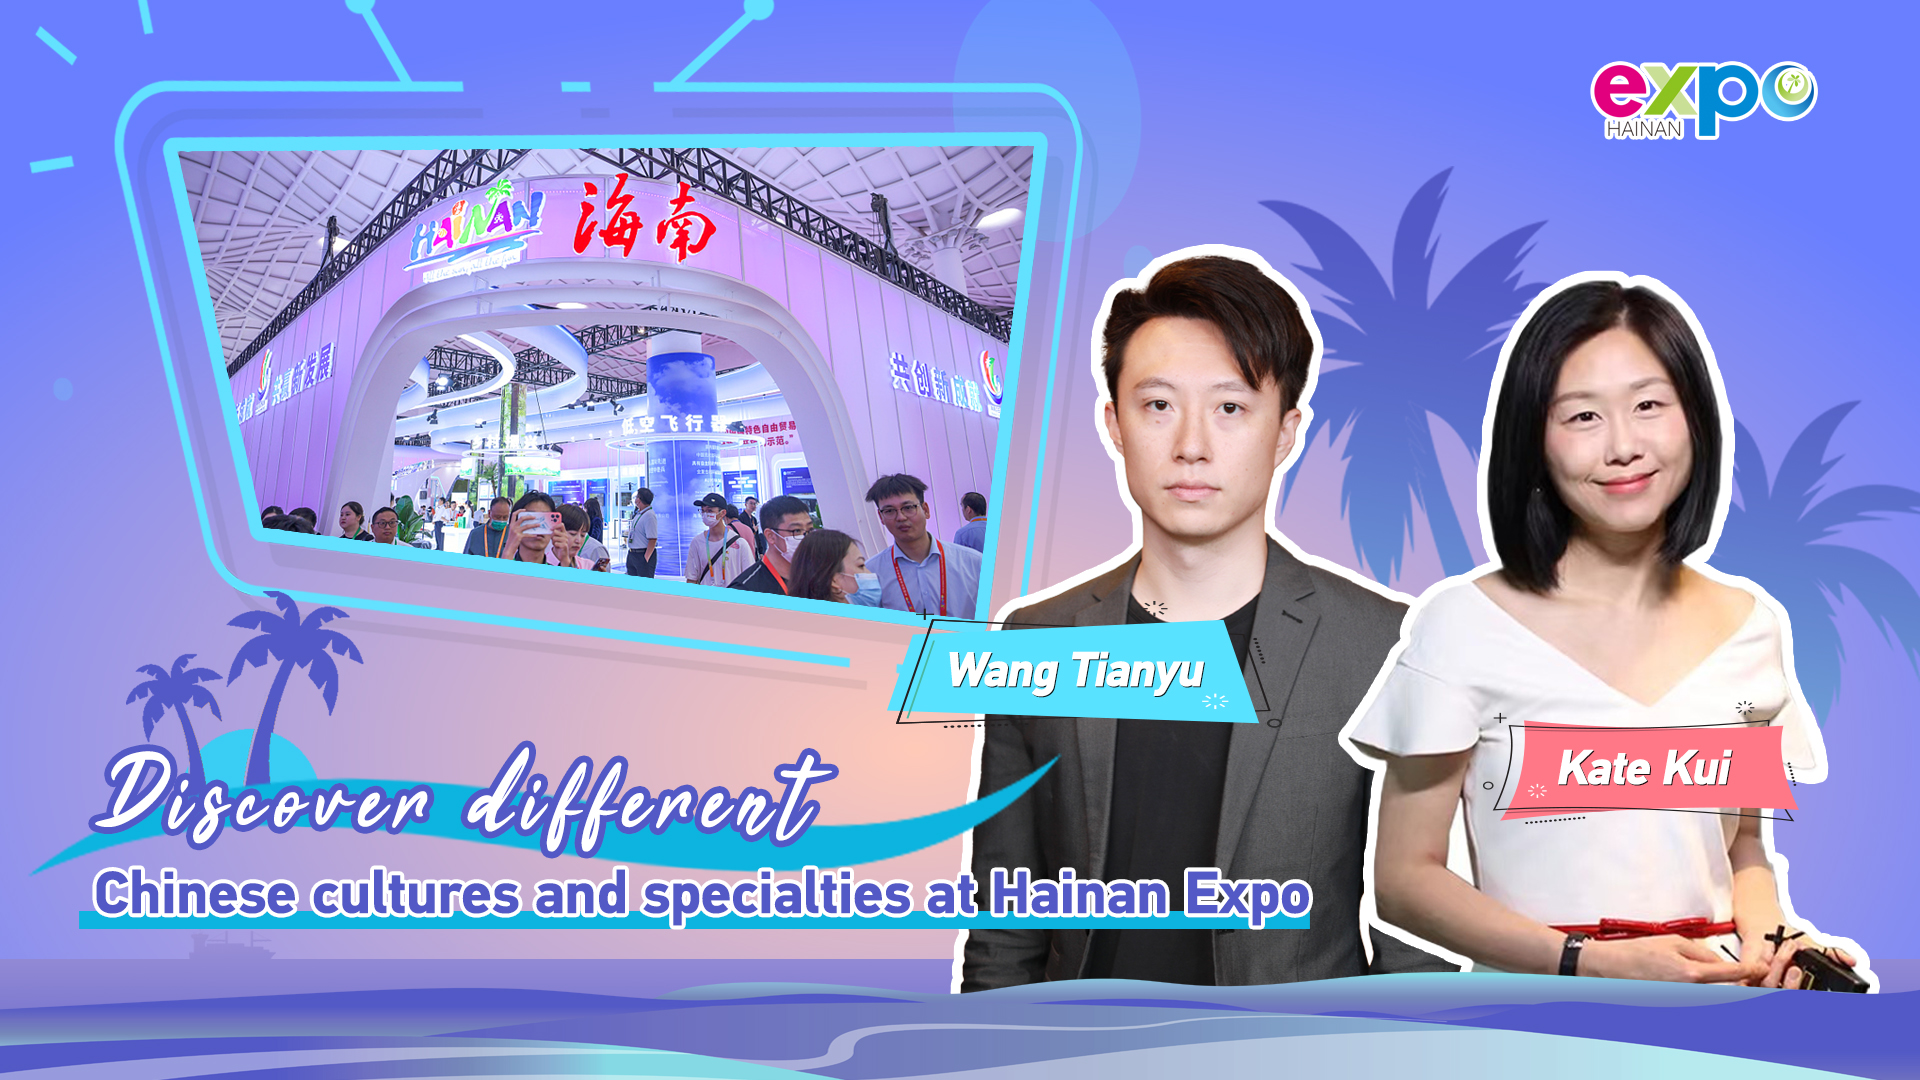 Live: Discover different Chinese cultures and specialties at Hainan Expo